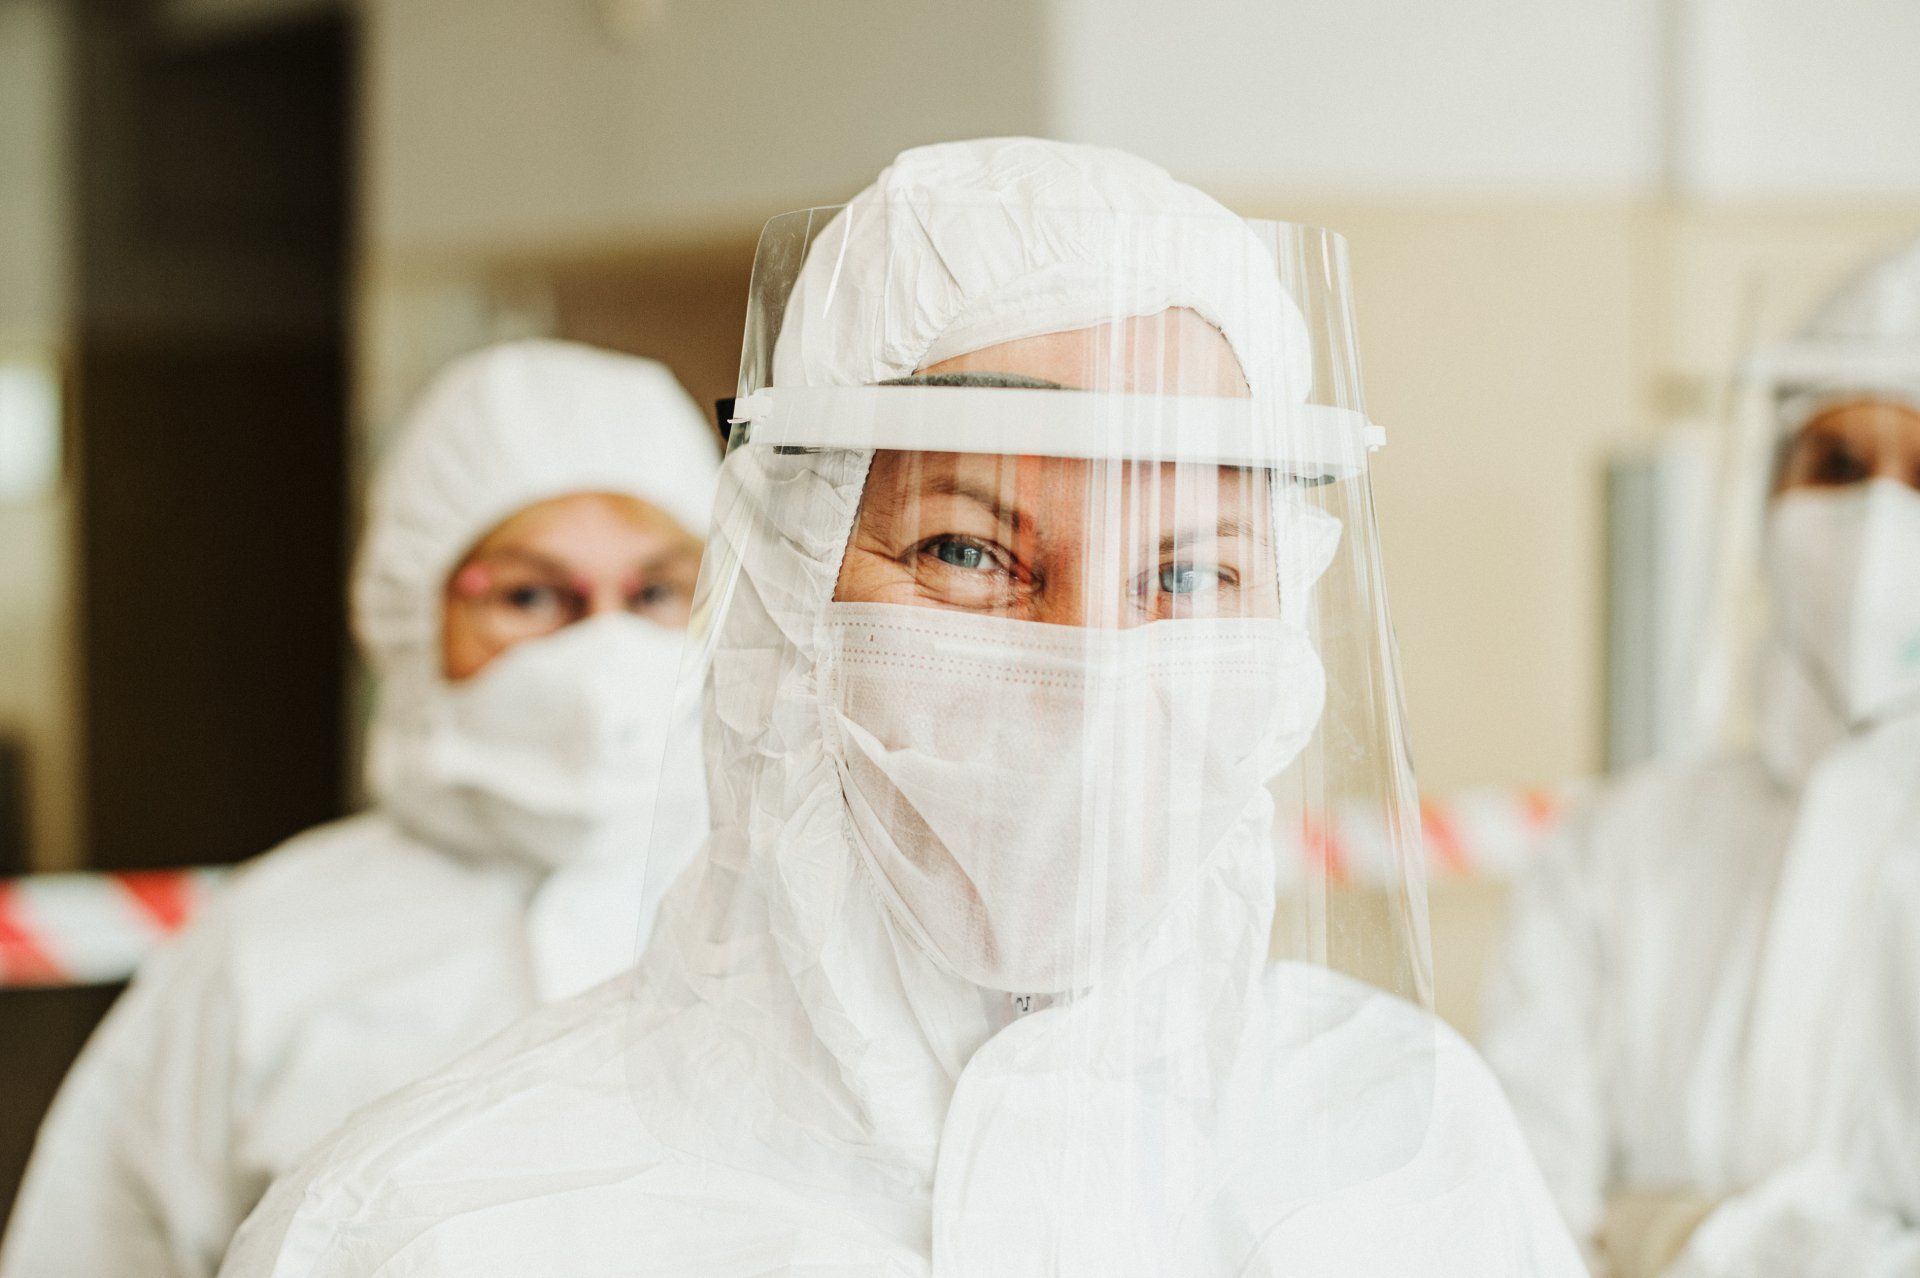 A group of people wearing protective suits and face shields.